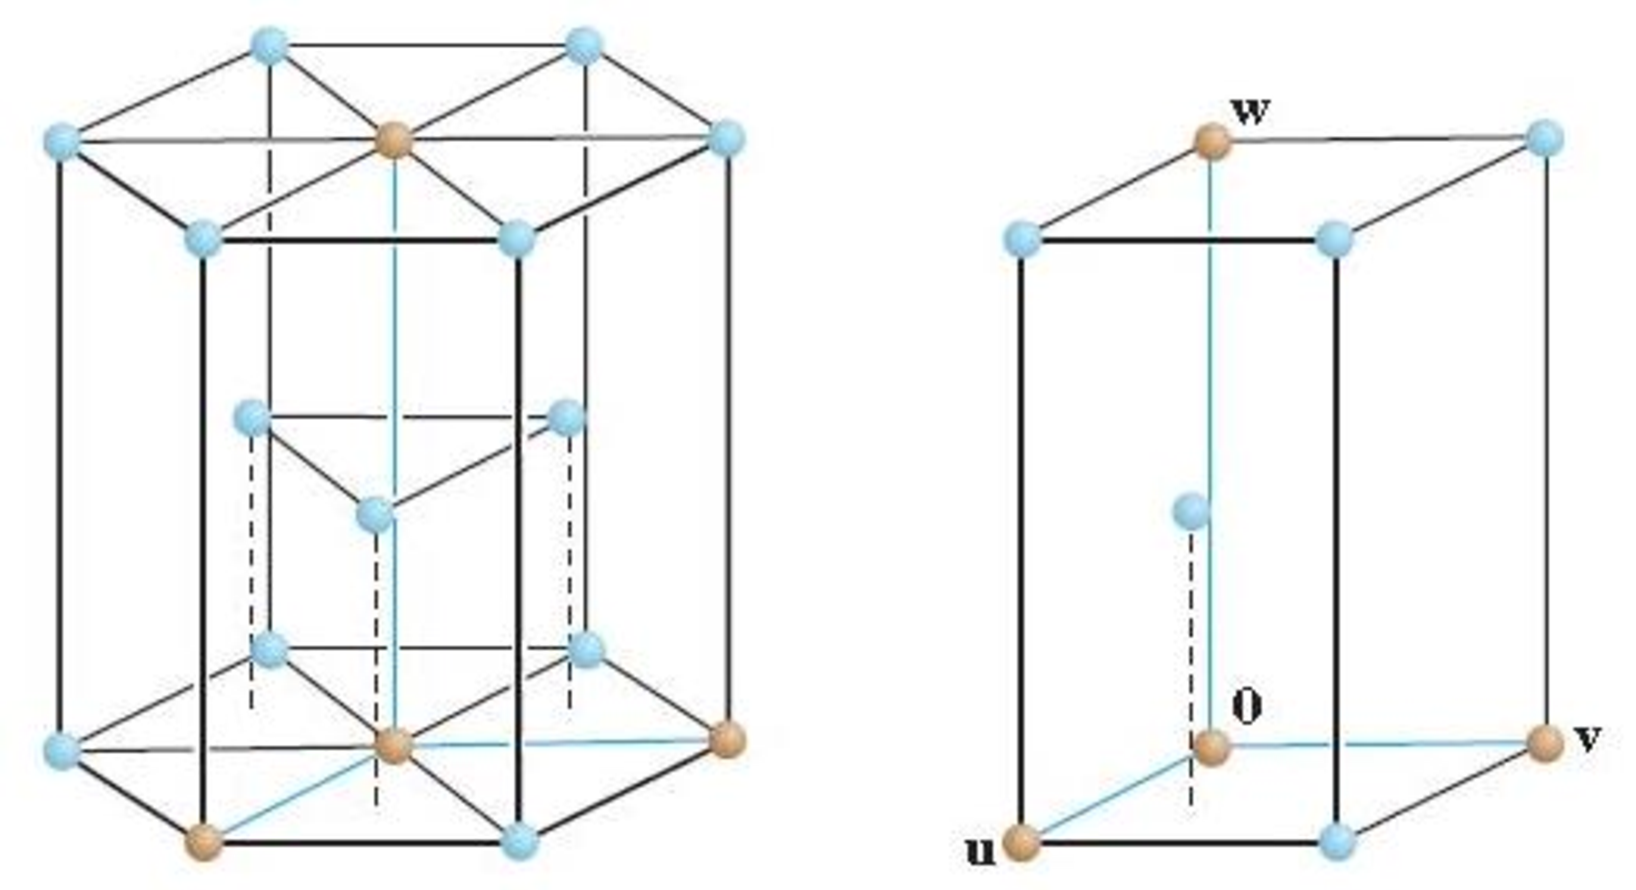 Chapter 4.4, Problem 37E, [M] Exercises 37 and 38 concern the crystal lattice for titanium, which has the hexagonal structure 